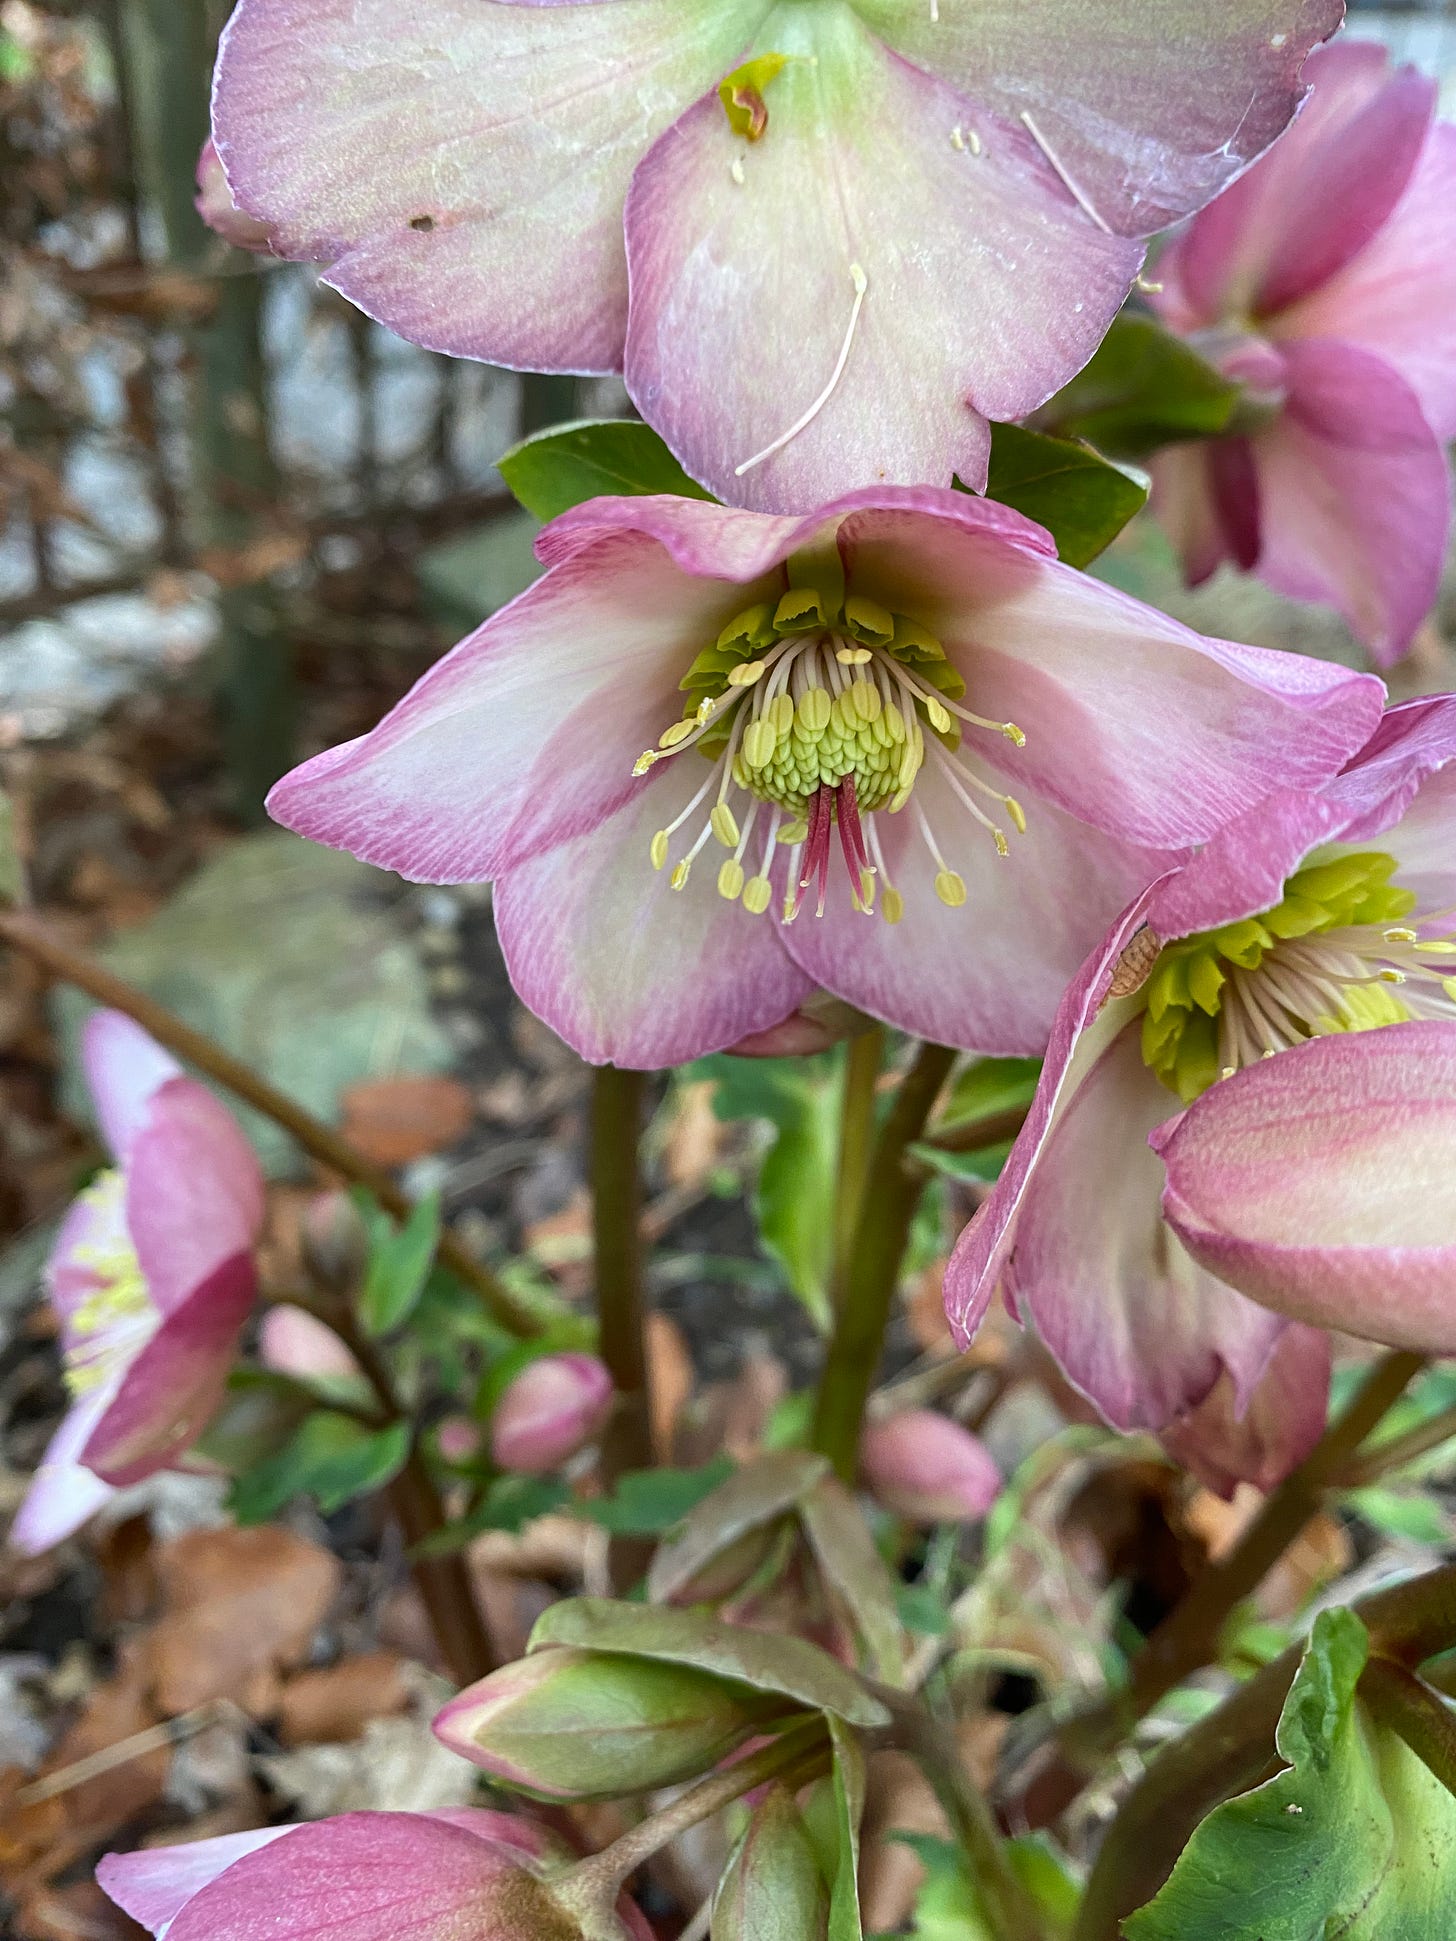 A close up photo of a clump of hellebores, with the yellow-green stamens of one flower, surrounded by pink edged sepals, the main focus of the photo.